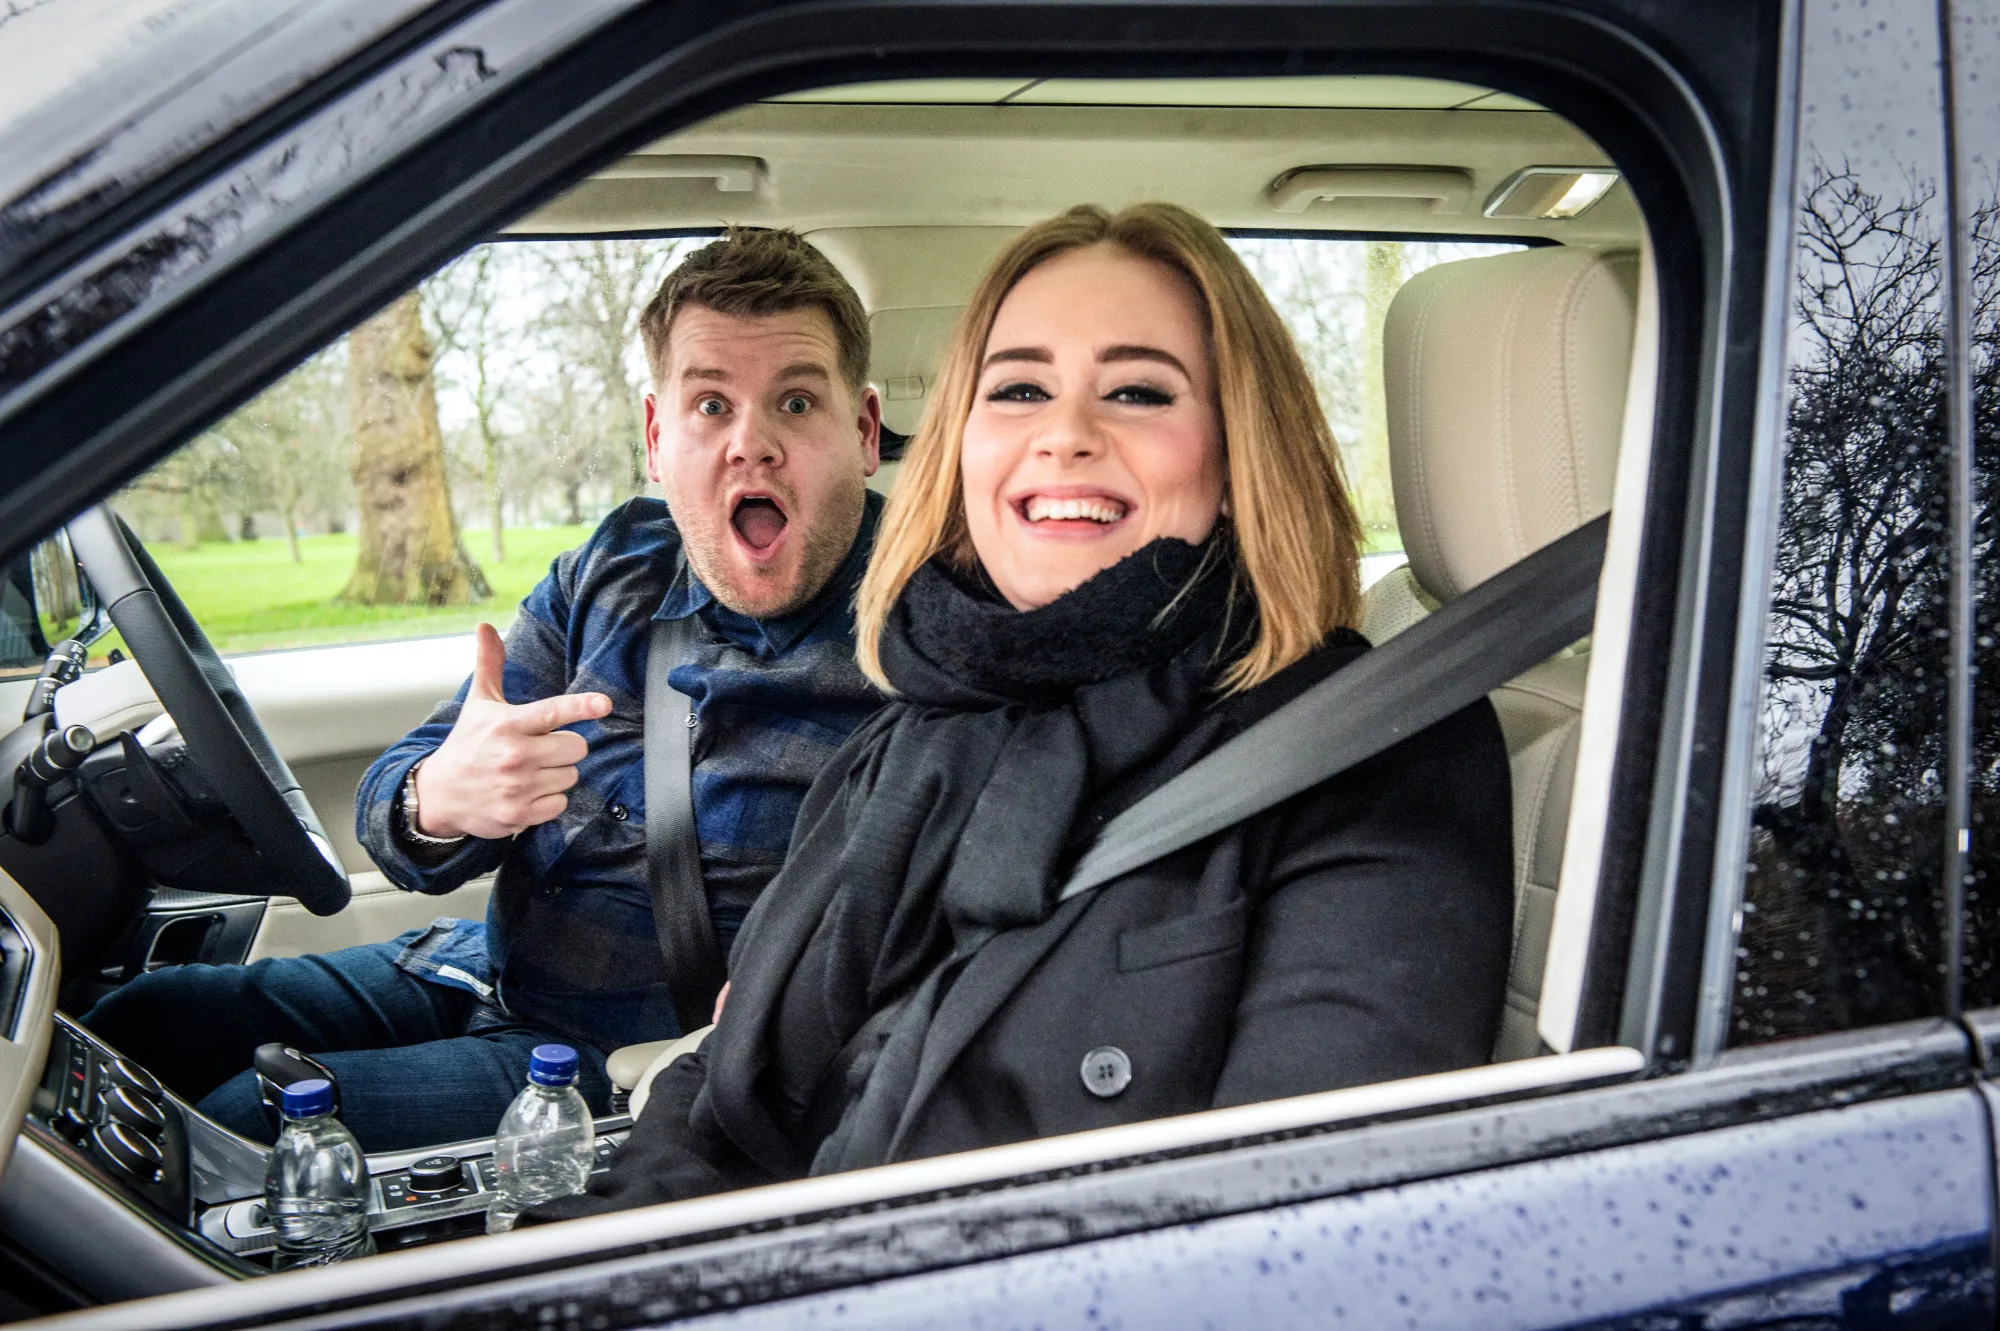 Adele and james corden in a car